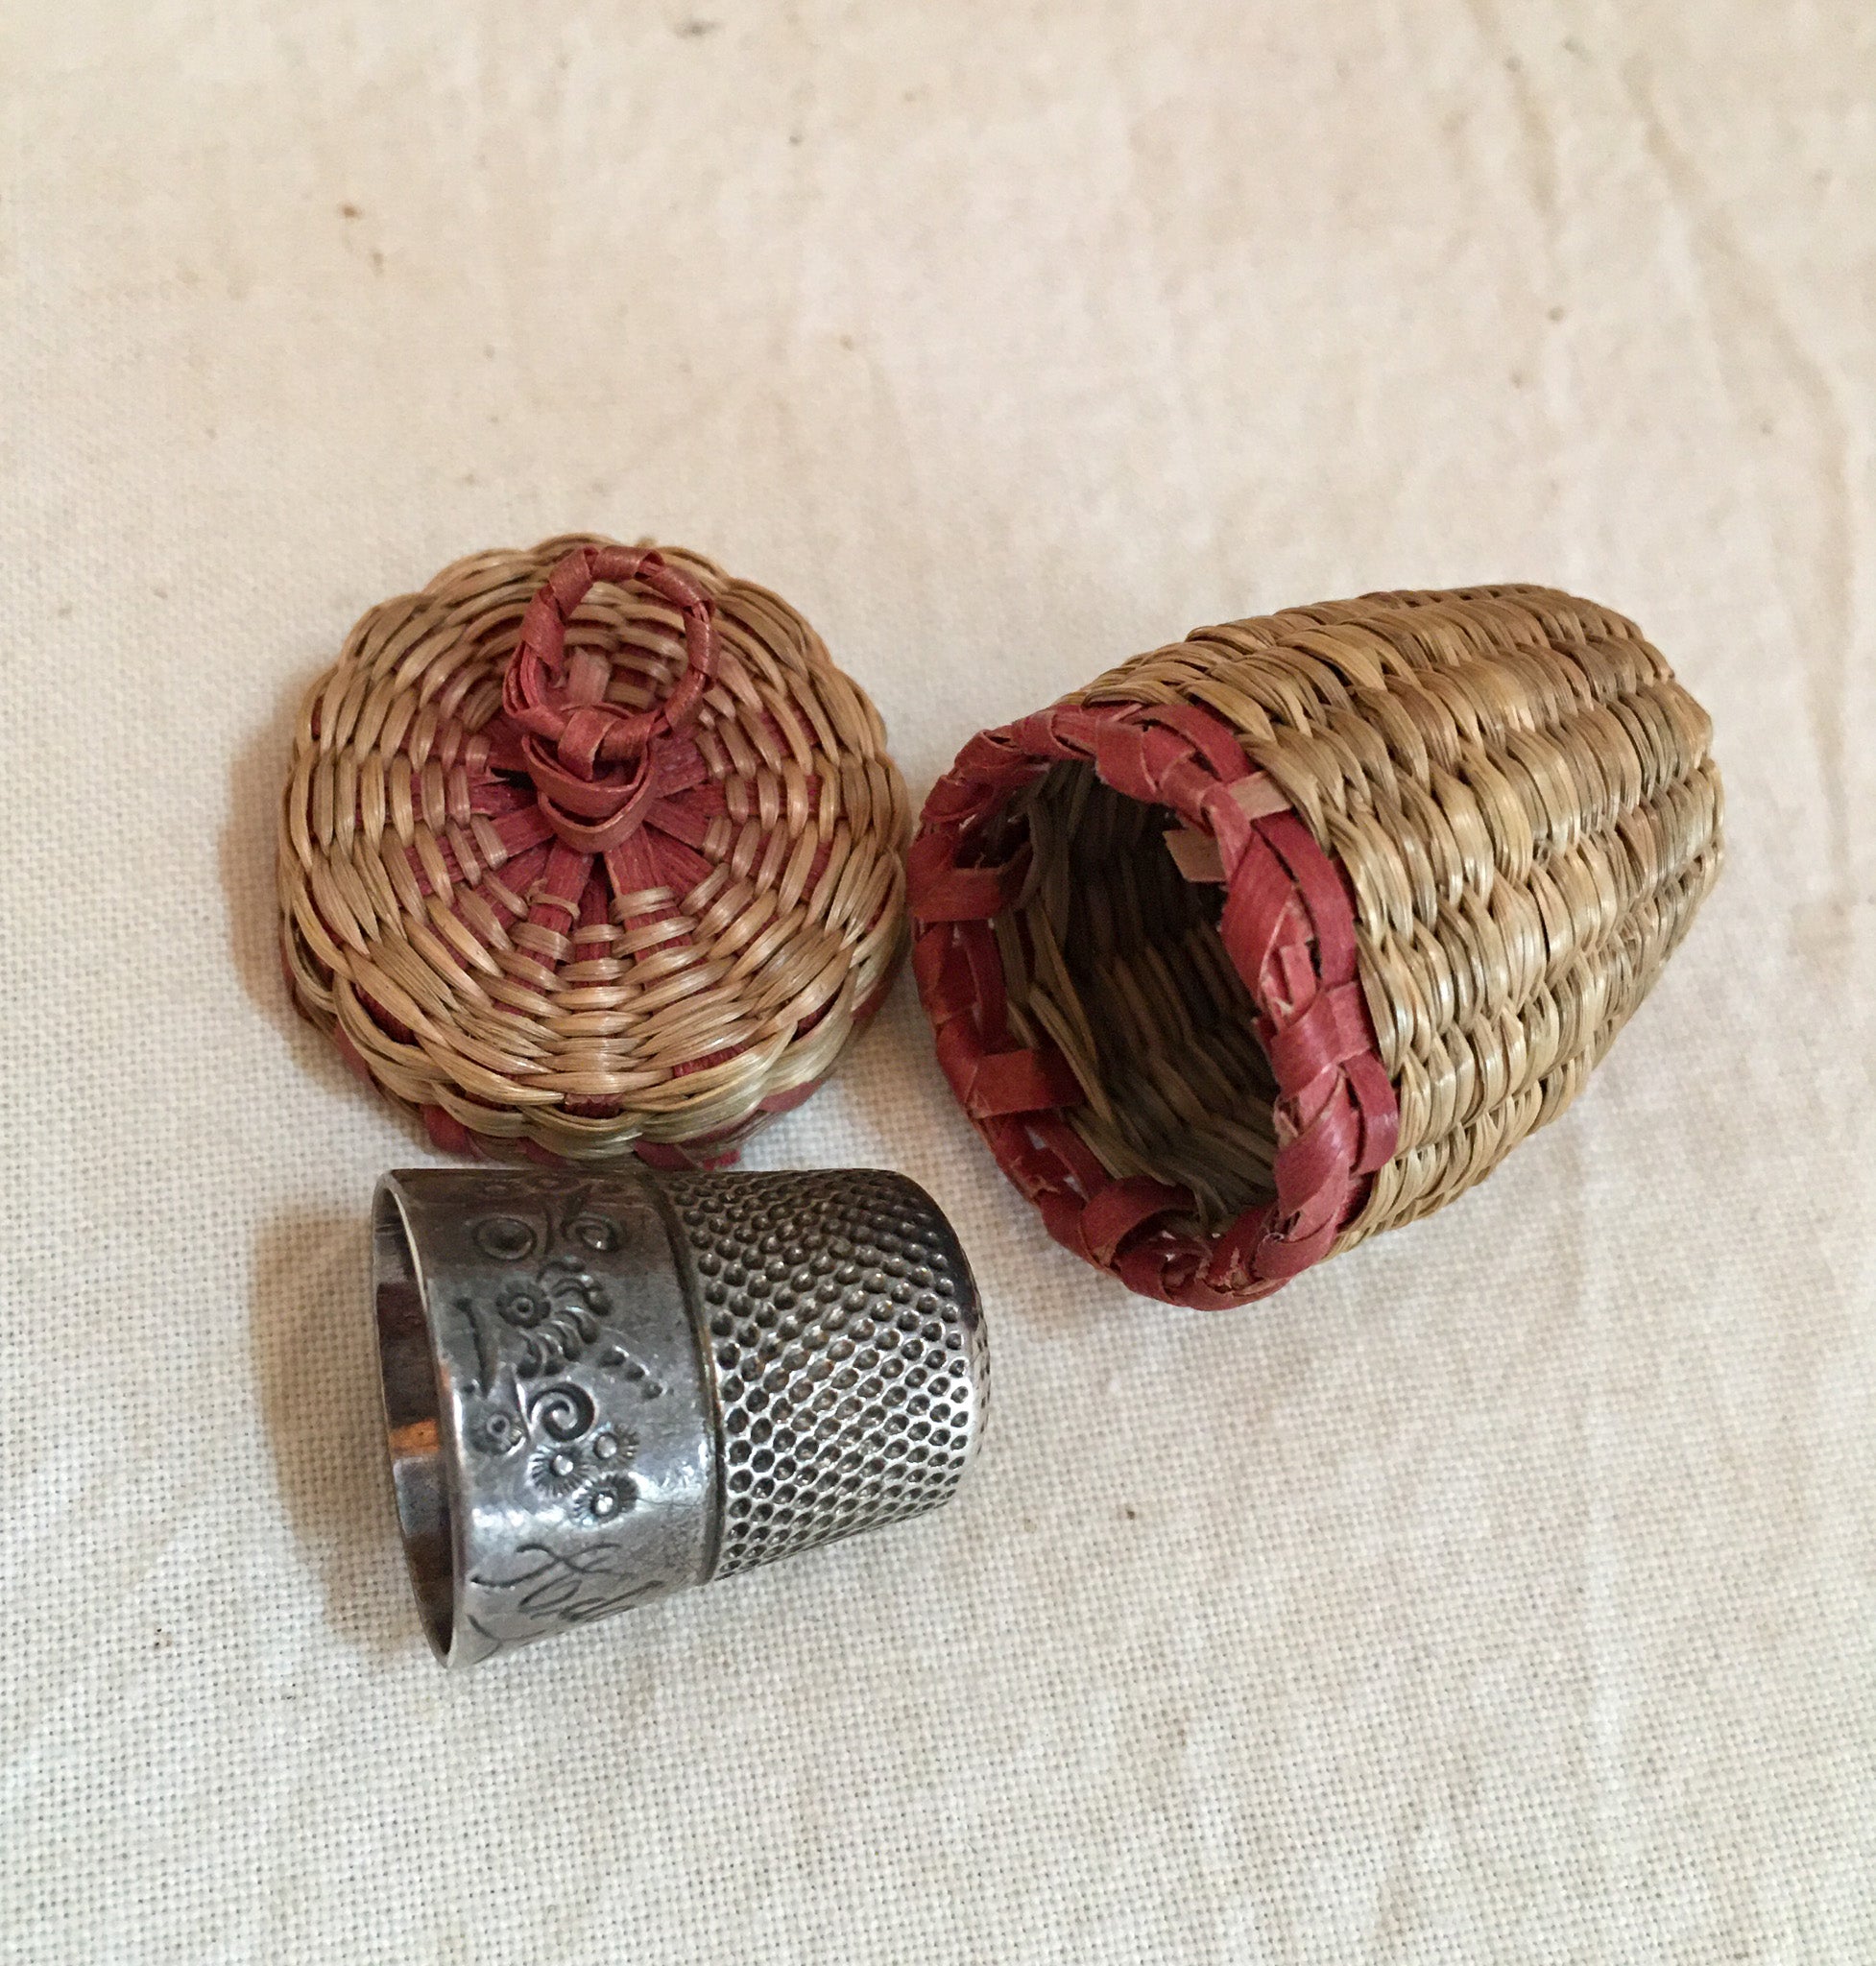 Early 1900’s Sweet Grass Thimble Basket with Sterling Silver Thimble "Ada '94"